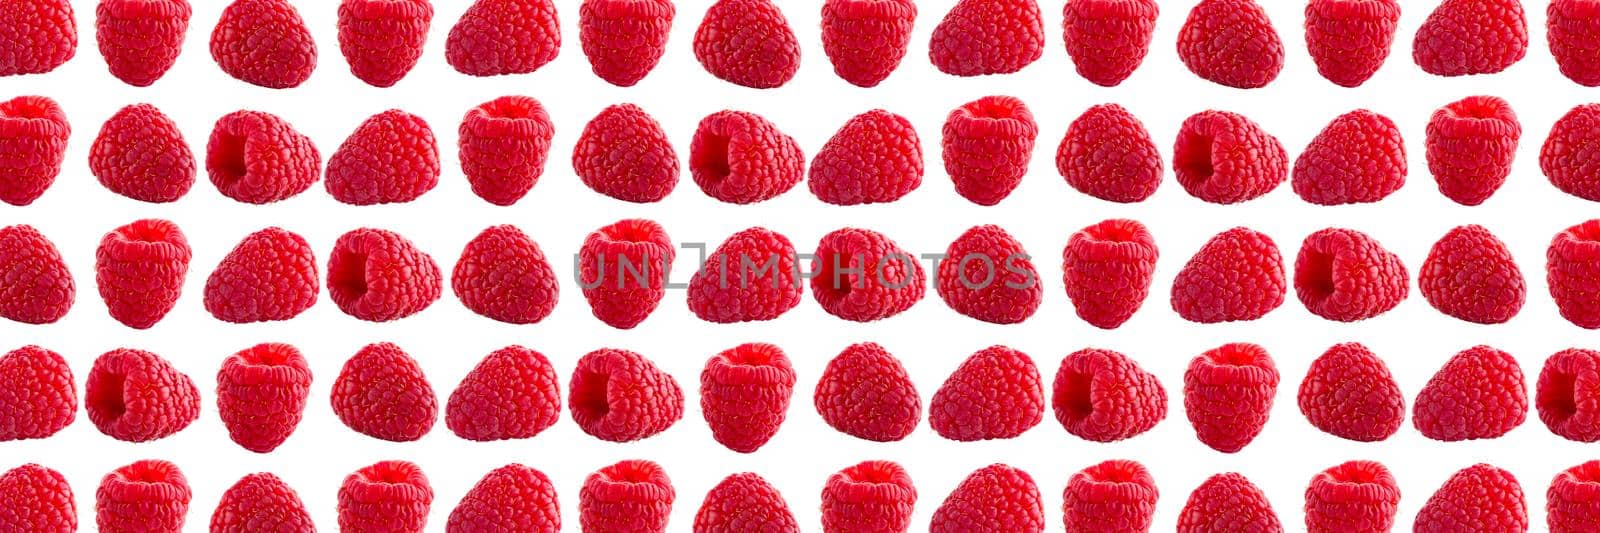 Raspberries abstract background. Fruit pattern of colorful wild berries isolated on white background. Raspberries, blackberry and brumble. Top view. Flat lay banner